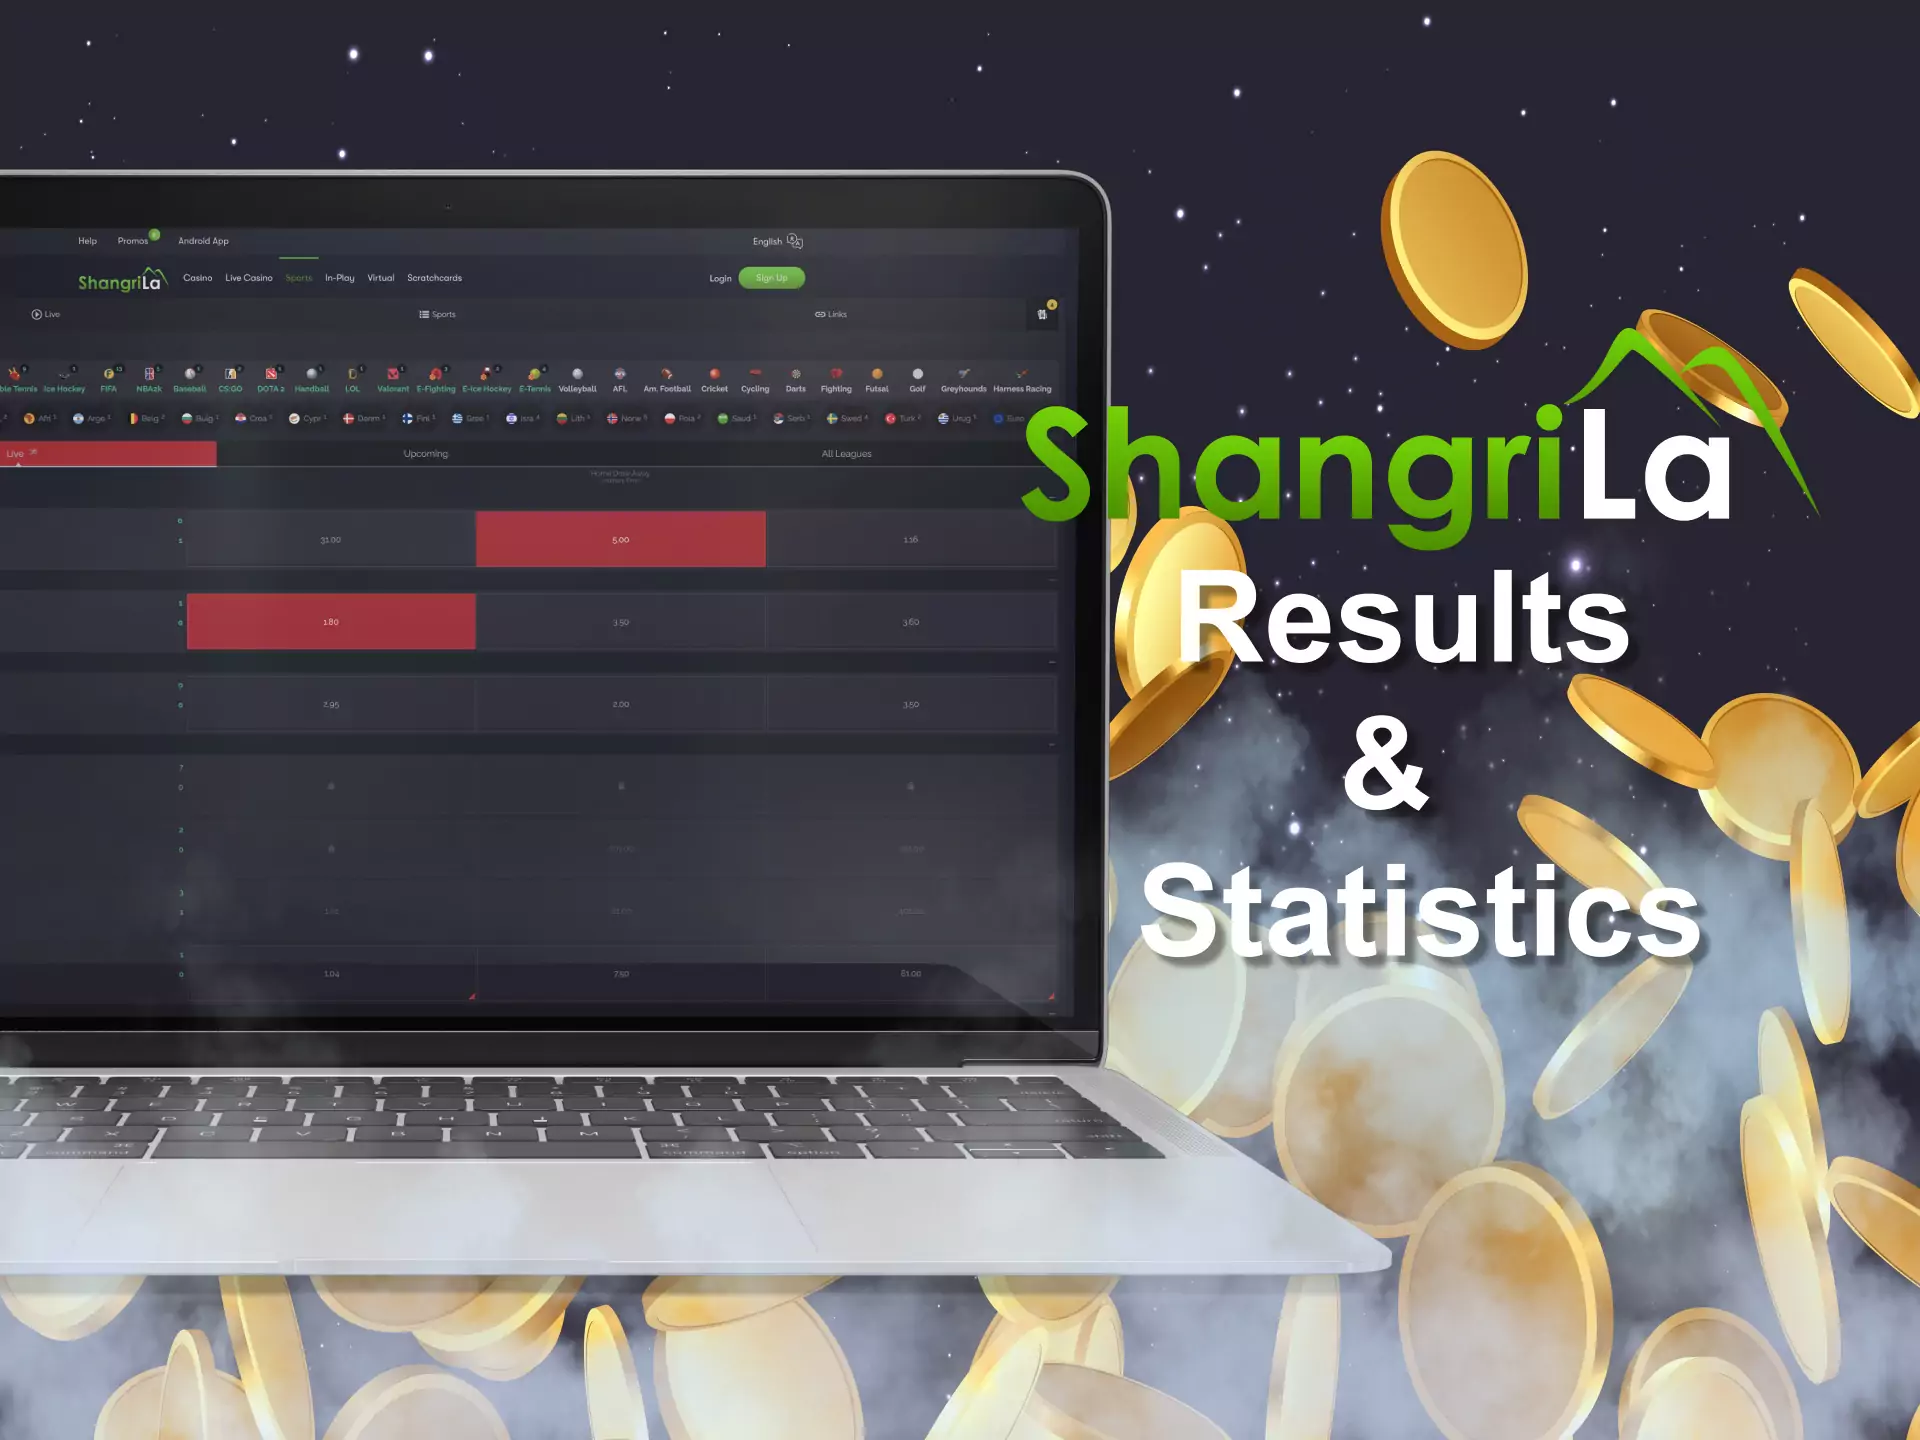 After matches, you can check the results and statistics on the Shangri La website.